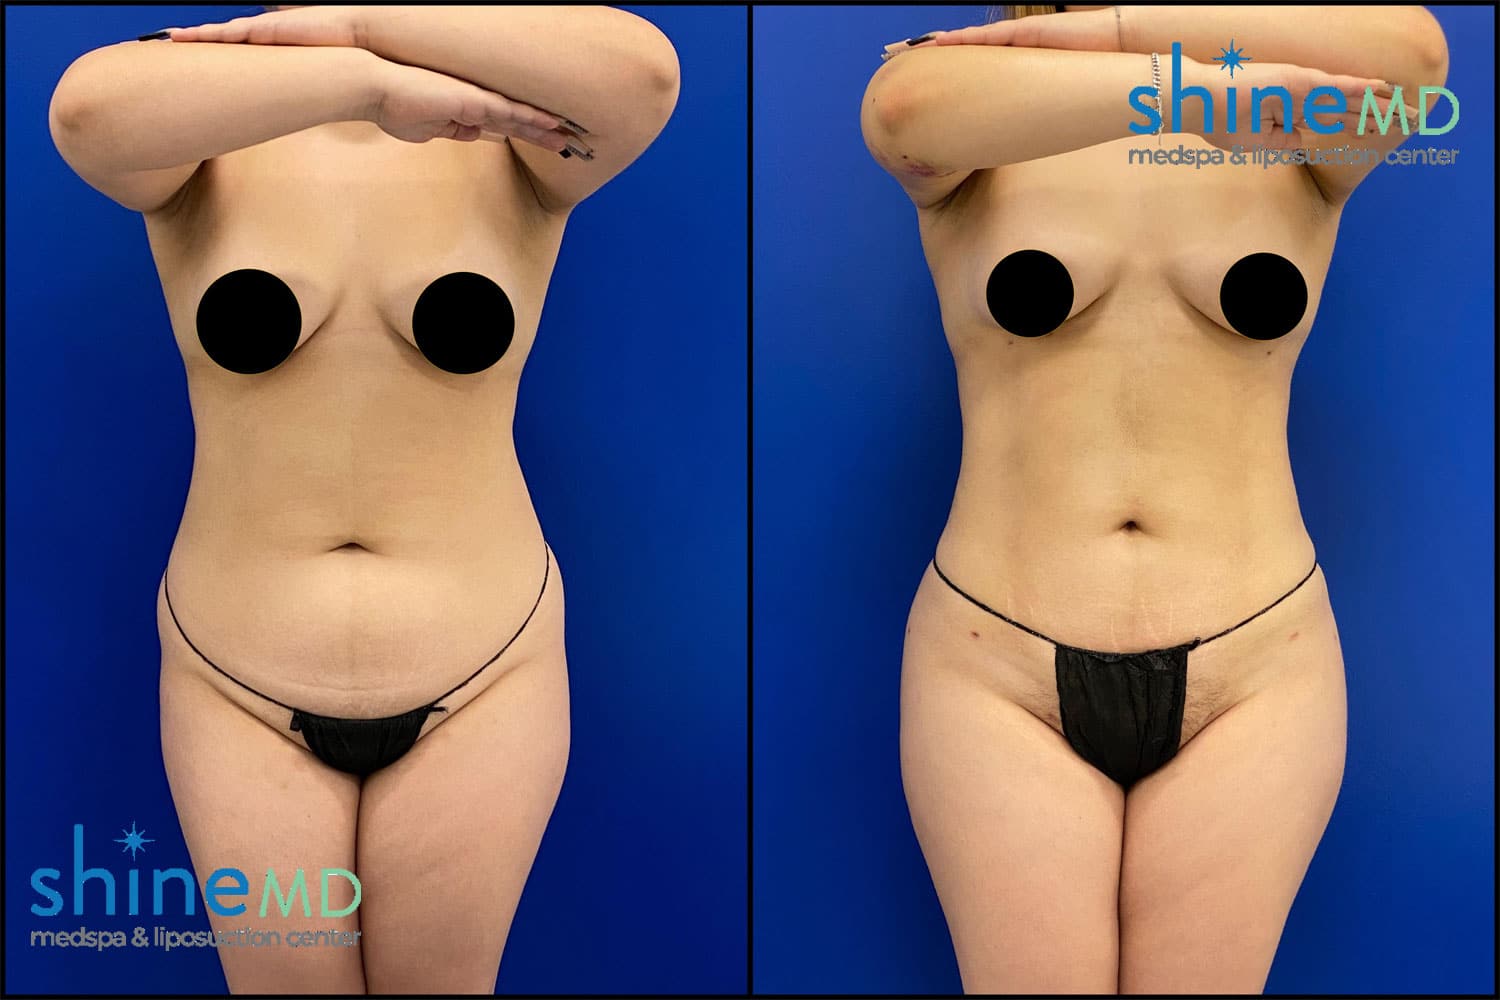 Body Sculpting Liposuction Before & After Photos